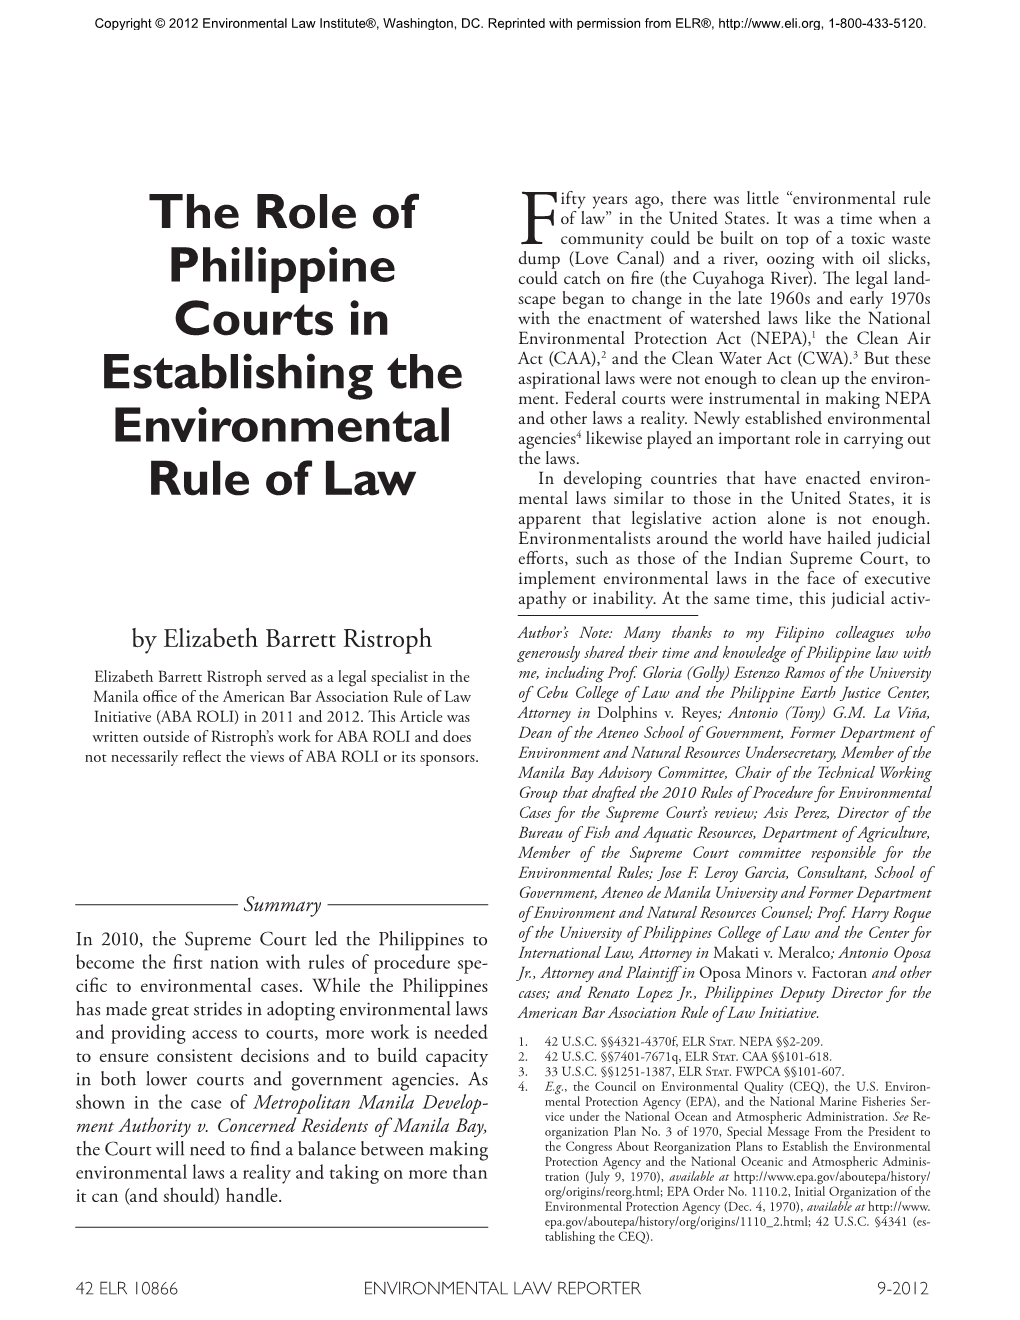 The Role of Philippine Courts in Establishing the Environmental Rule Of